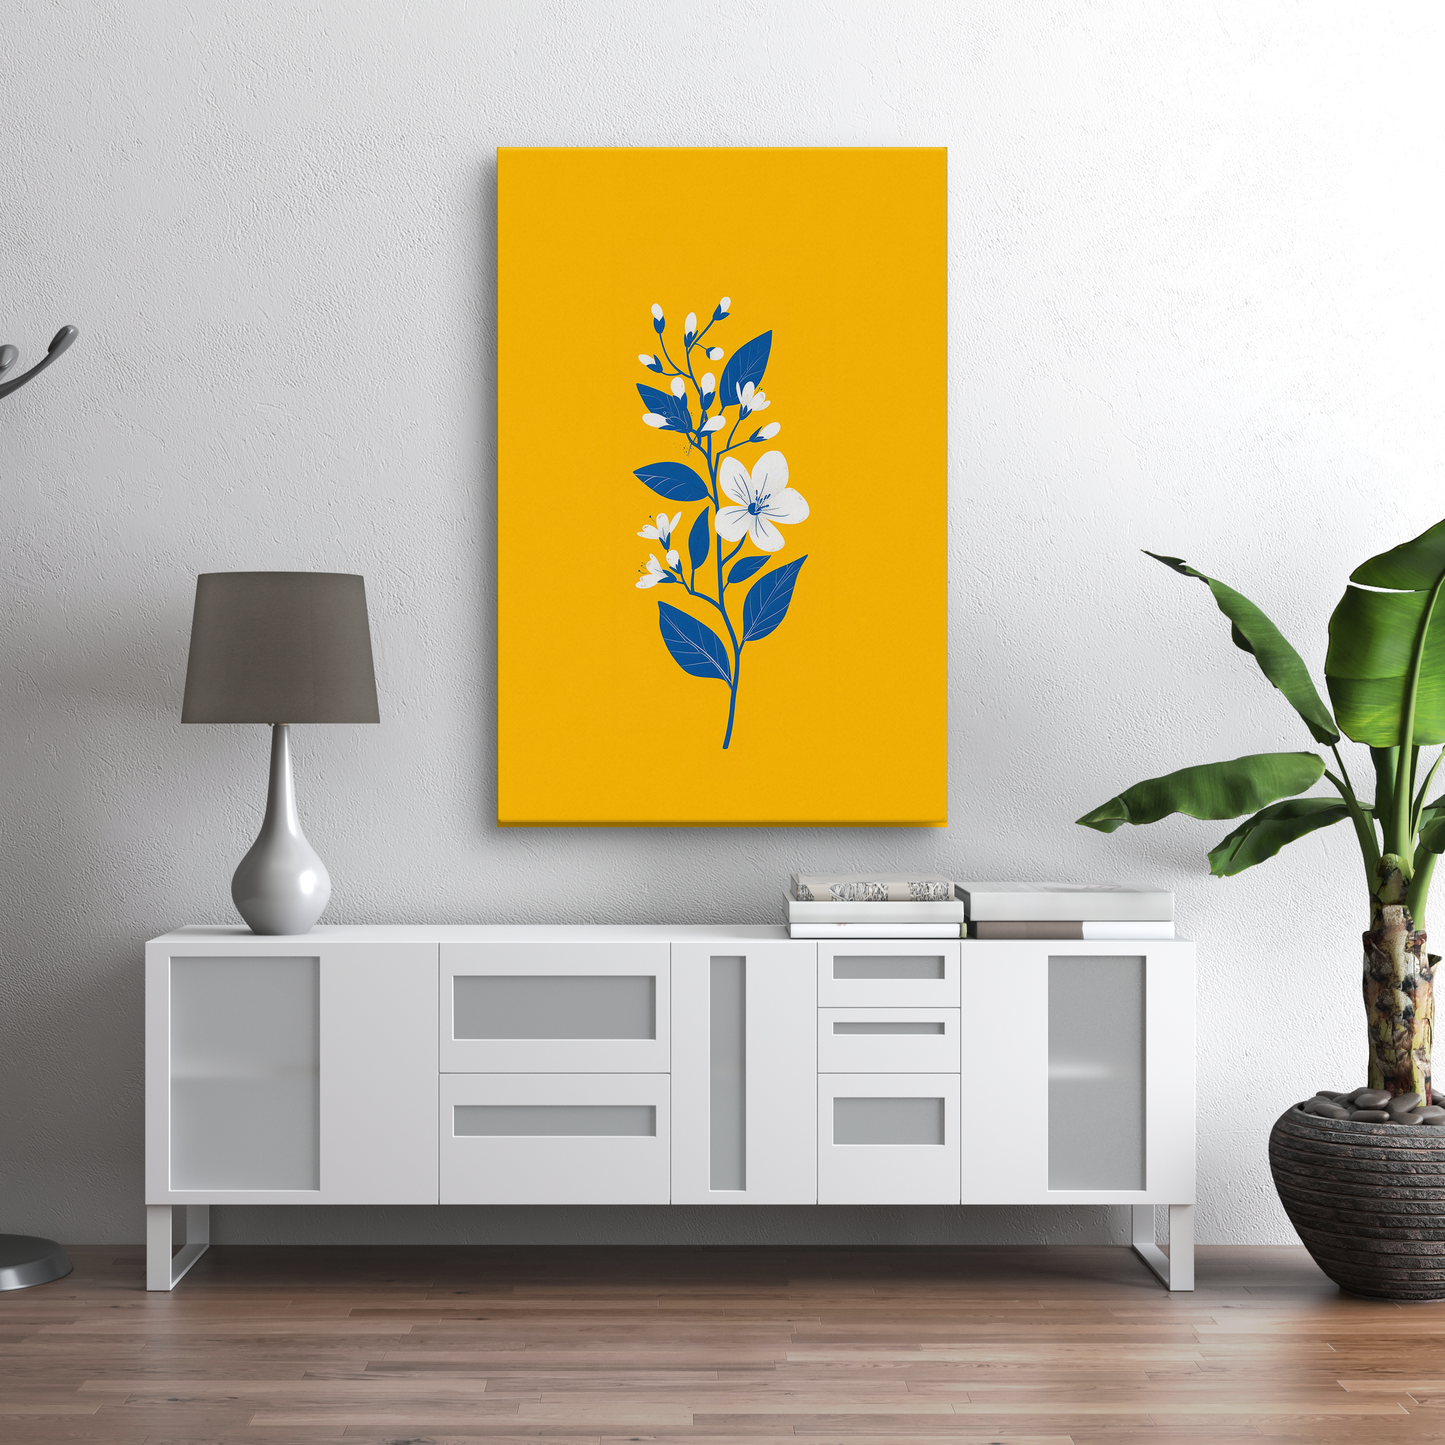 Indigo Bloom (Canvas)Upgrade your tech with the latest gadgets. Shop now for innovative products designed to enhance your digital lifestyle. Fast shipping!RimaGallery